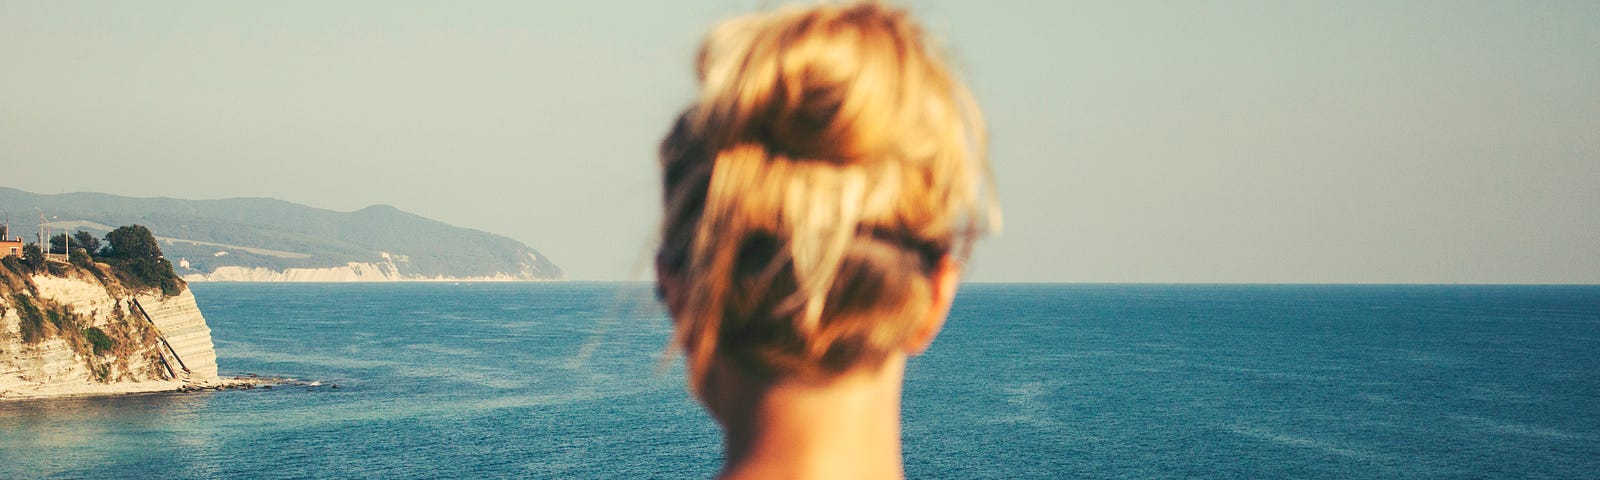 woman looks out at sea